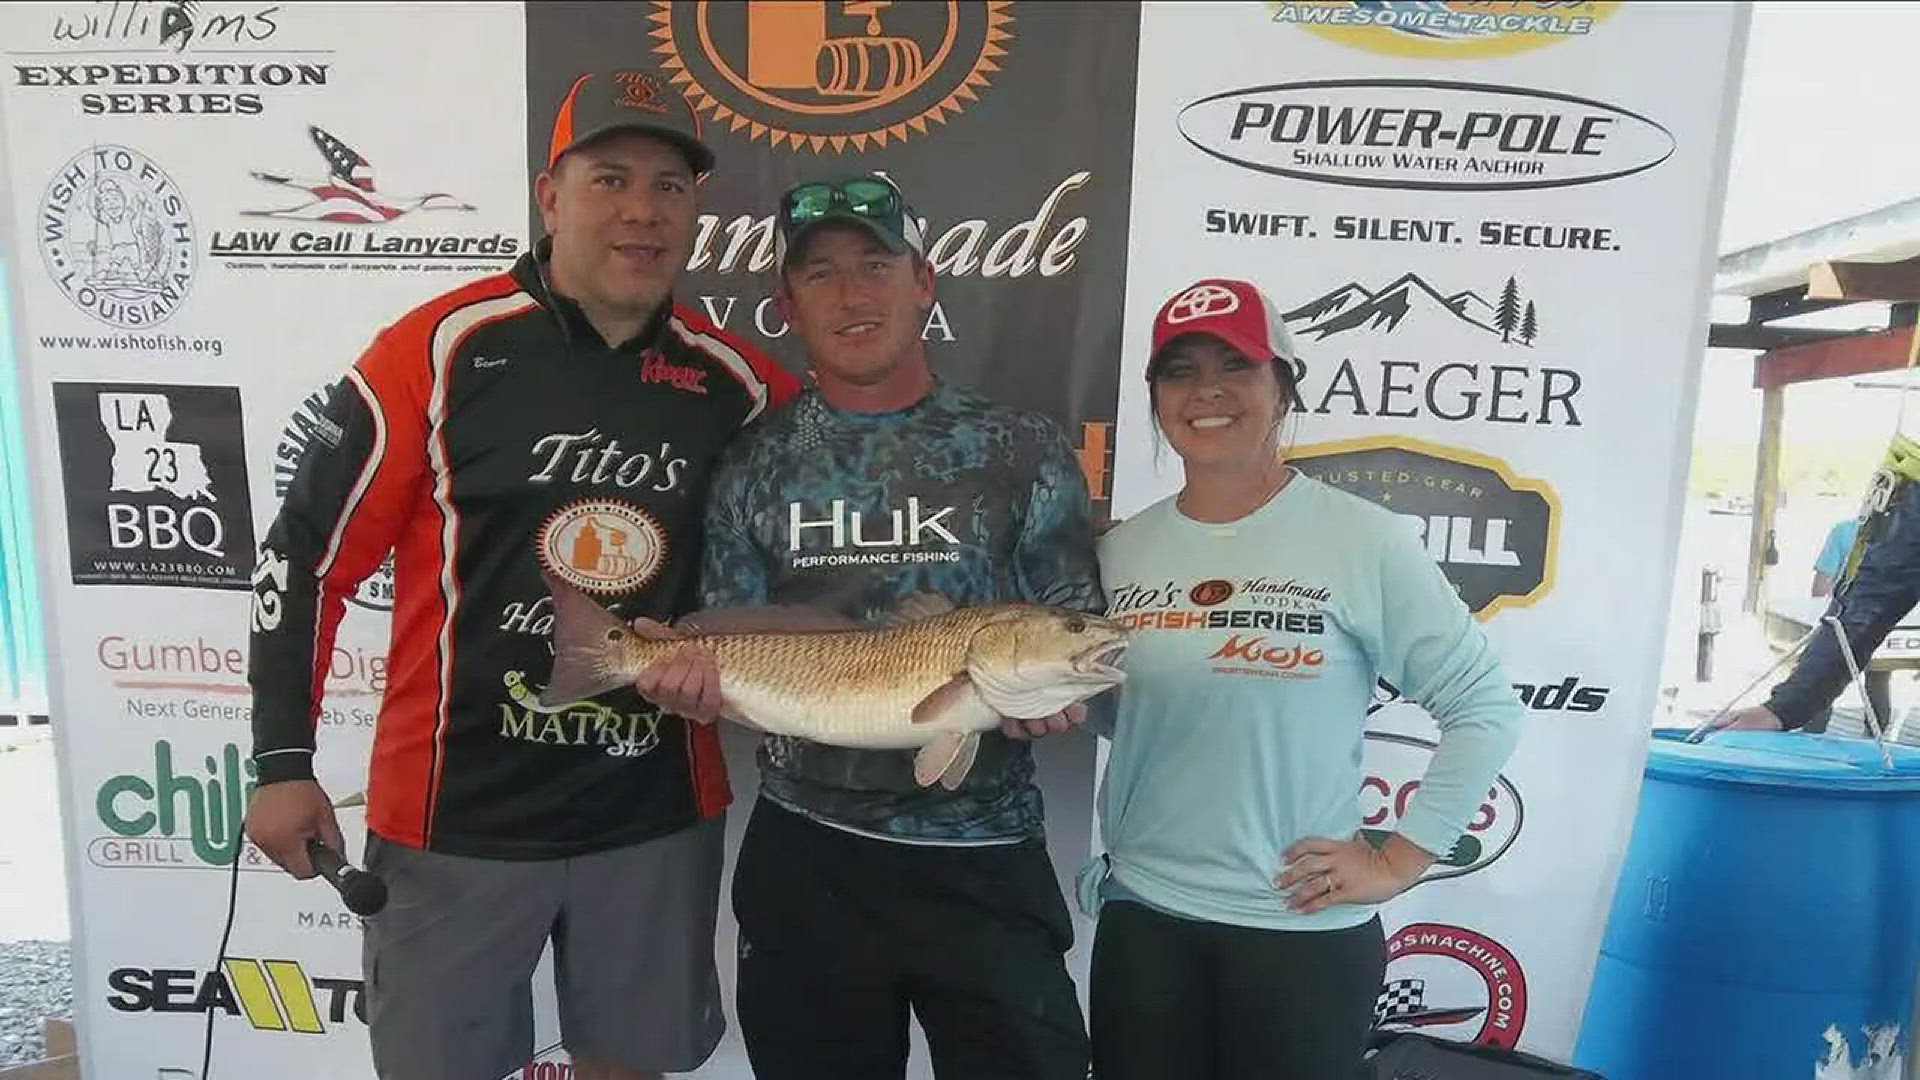 Don Dubuc's Fish & Game report on a redfish tournament happening Friday, despite the concerns over Tropical Storm Nate.